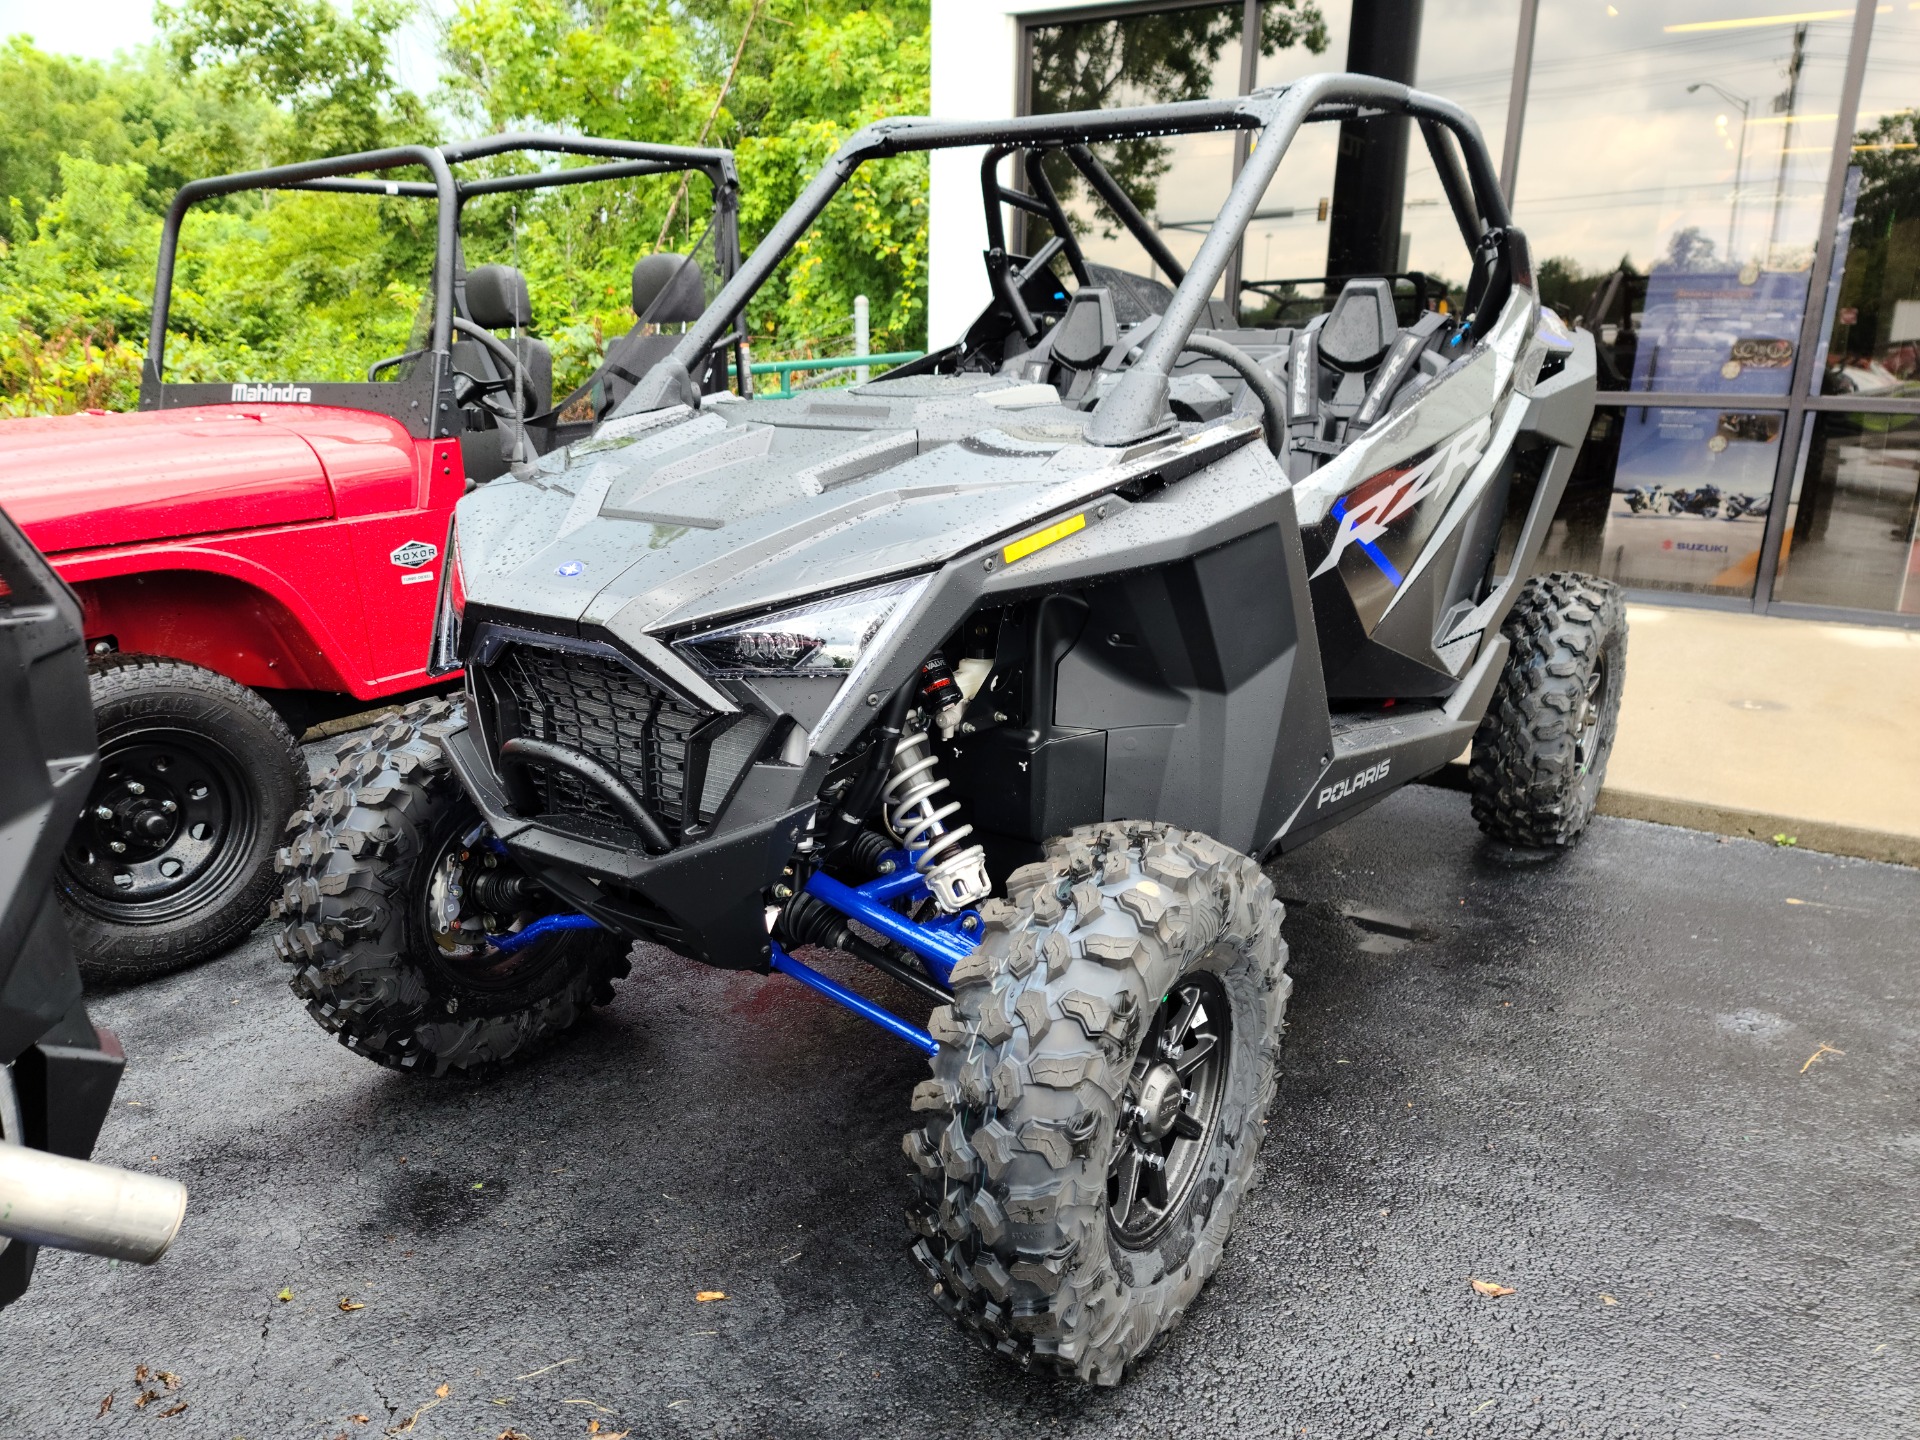 2022 Polaris RZR Pro XP Ultimate in Clinton, Tennessee - Photo 2